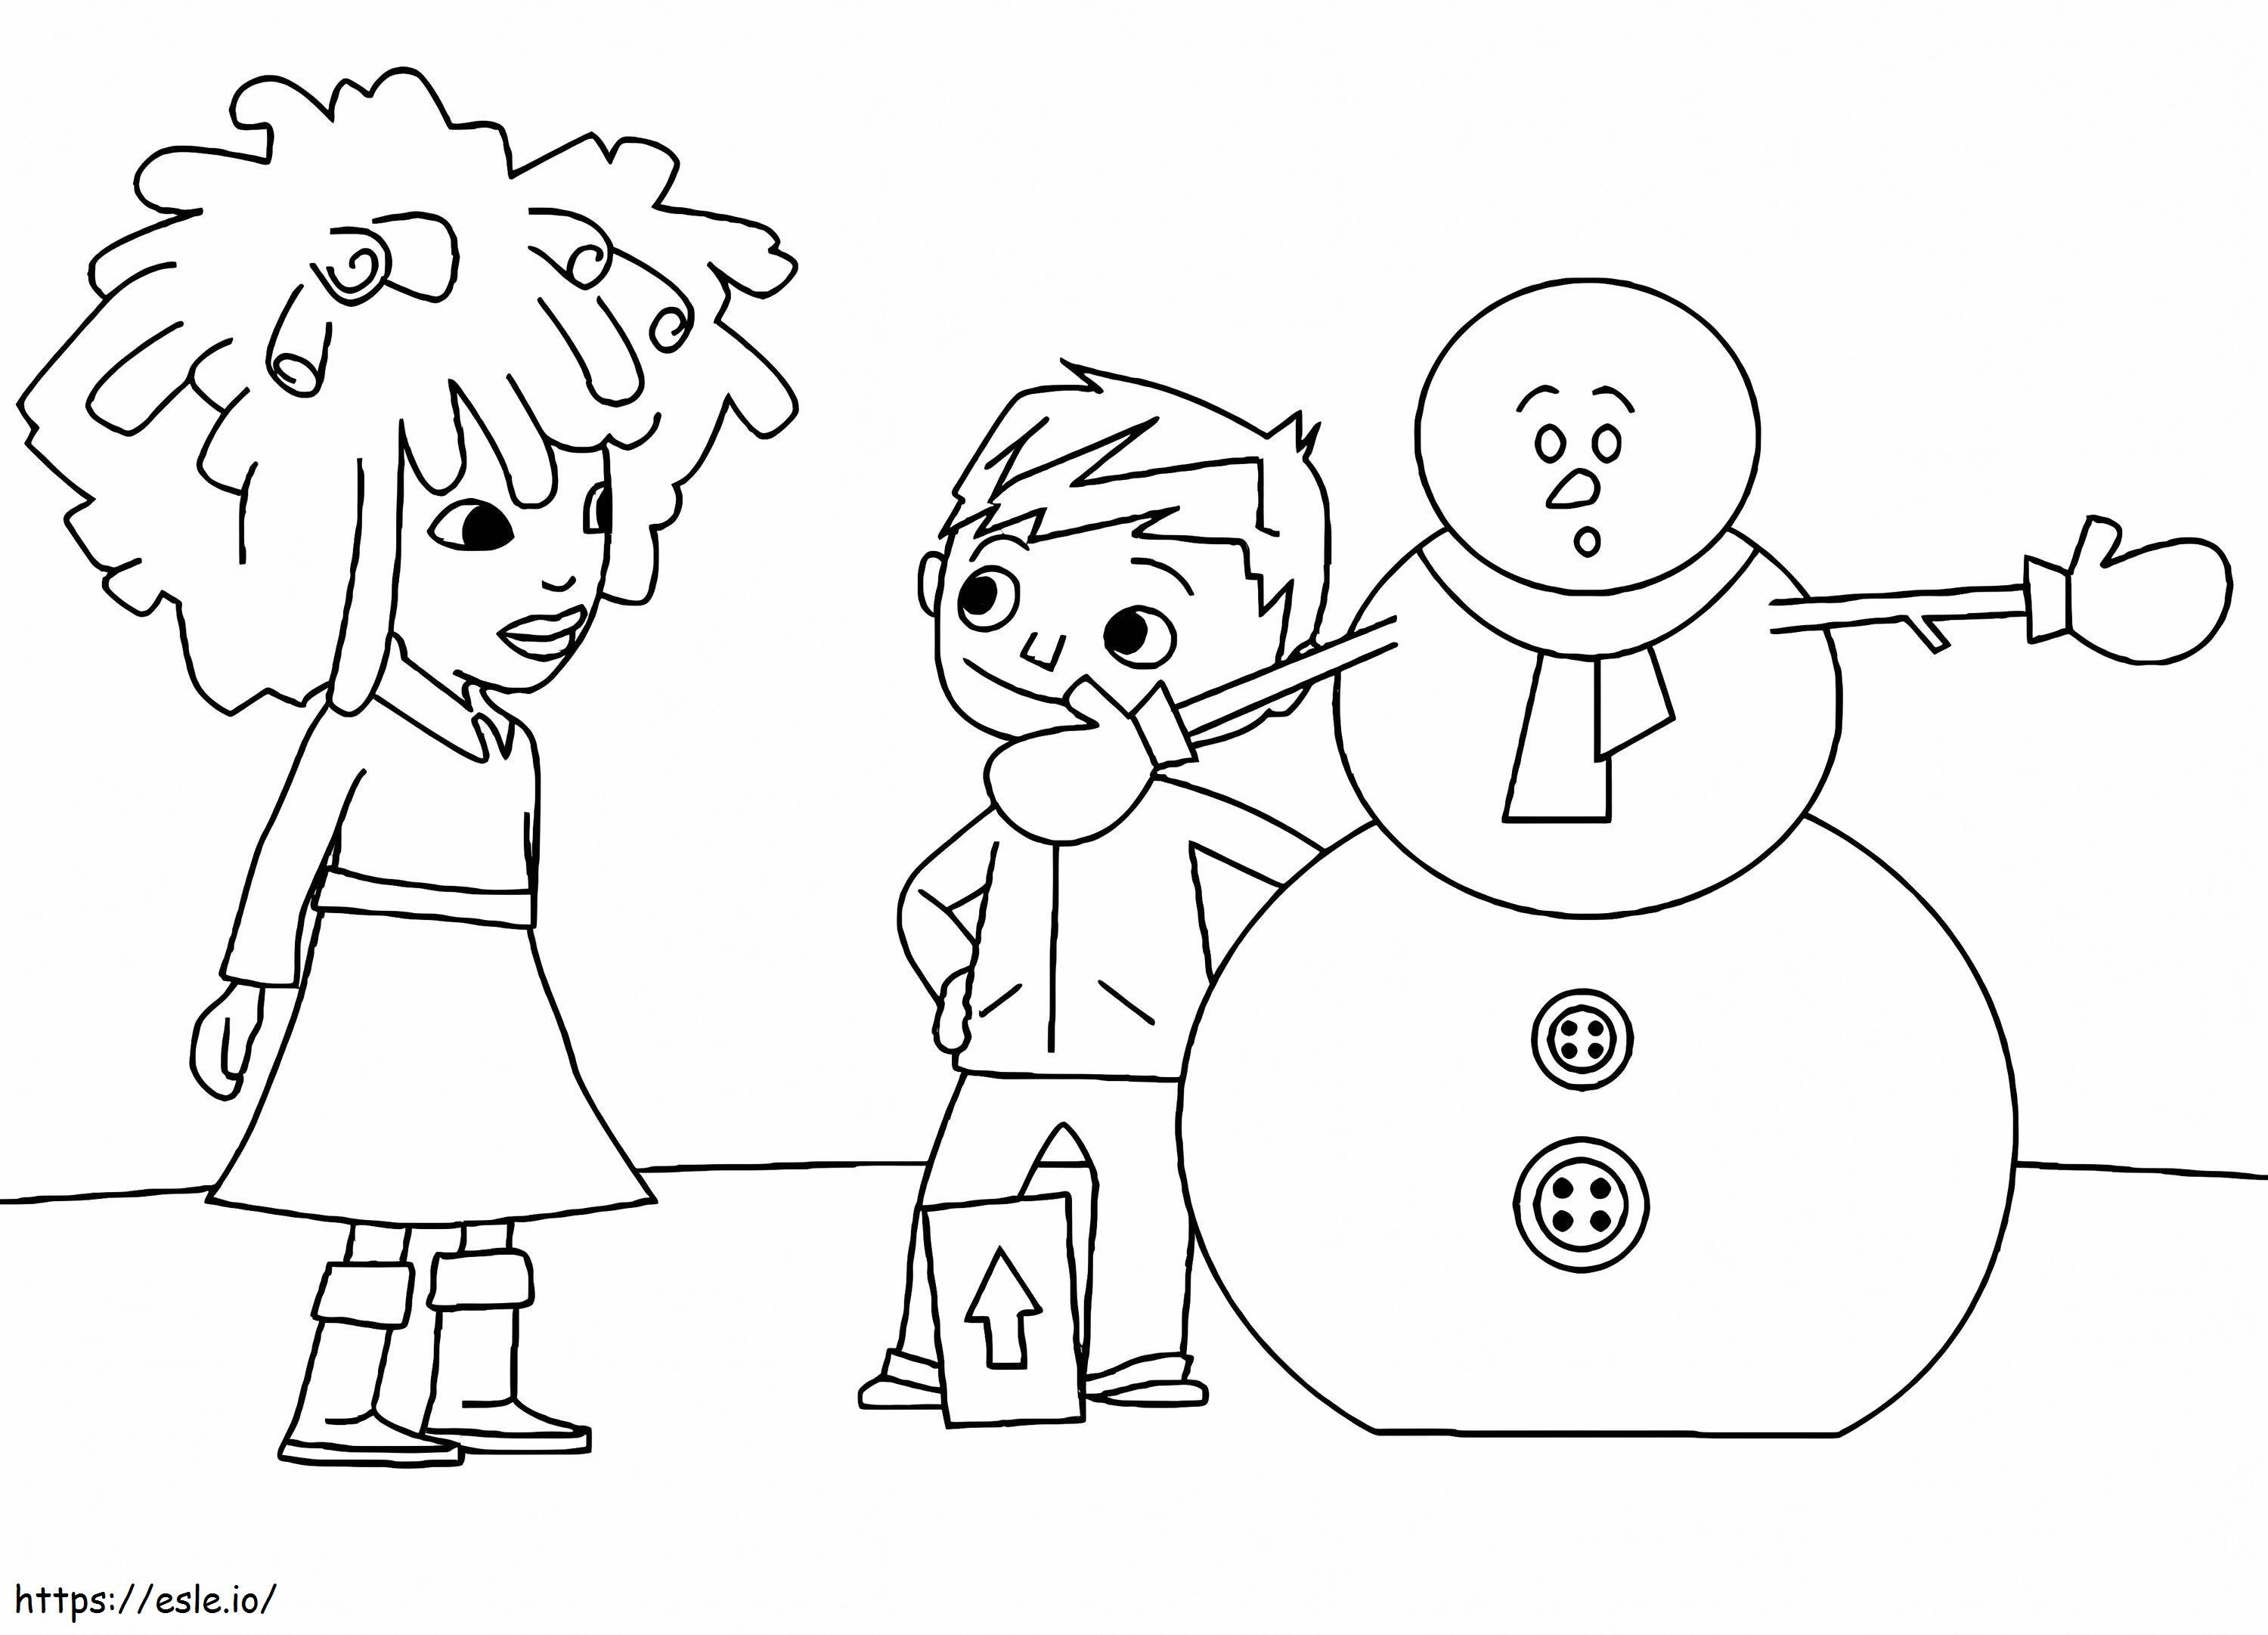 Zack And Kira And Snowman coloring page